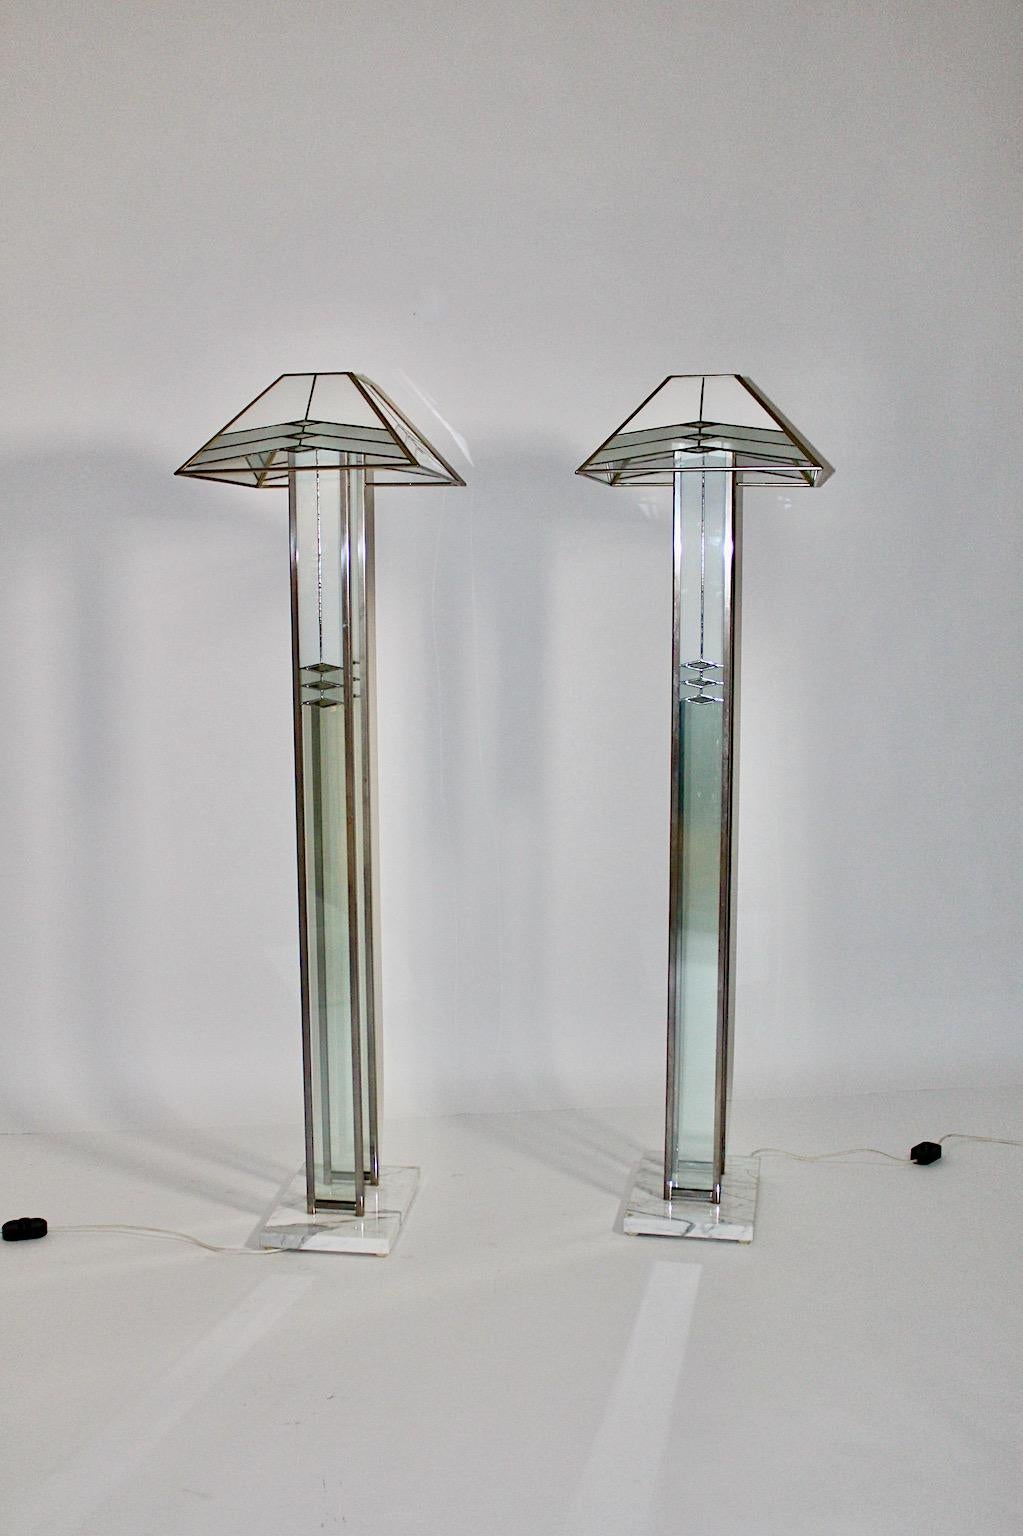 Modern Hollywood Regency style pair of vintage floor lamps by Albano Poli for Poliarte 1980s Italy from marble, glass, chromed metal and perspex.
An elegant pair of floor lamps in milky and grey pastel color tones, if you falling in love with these